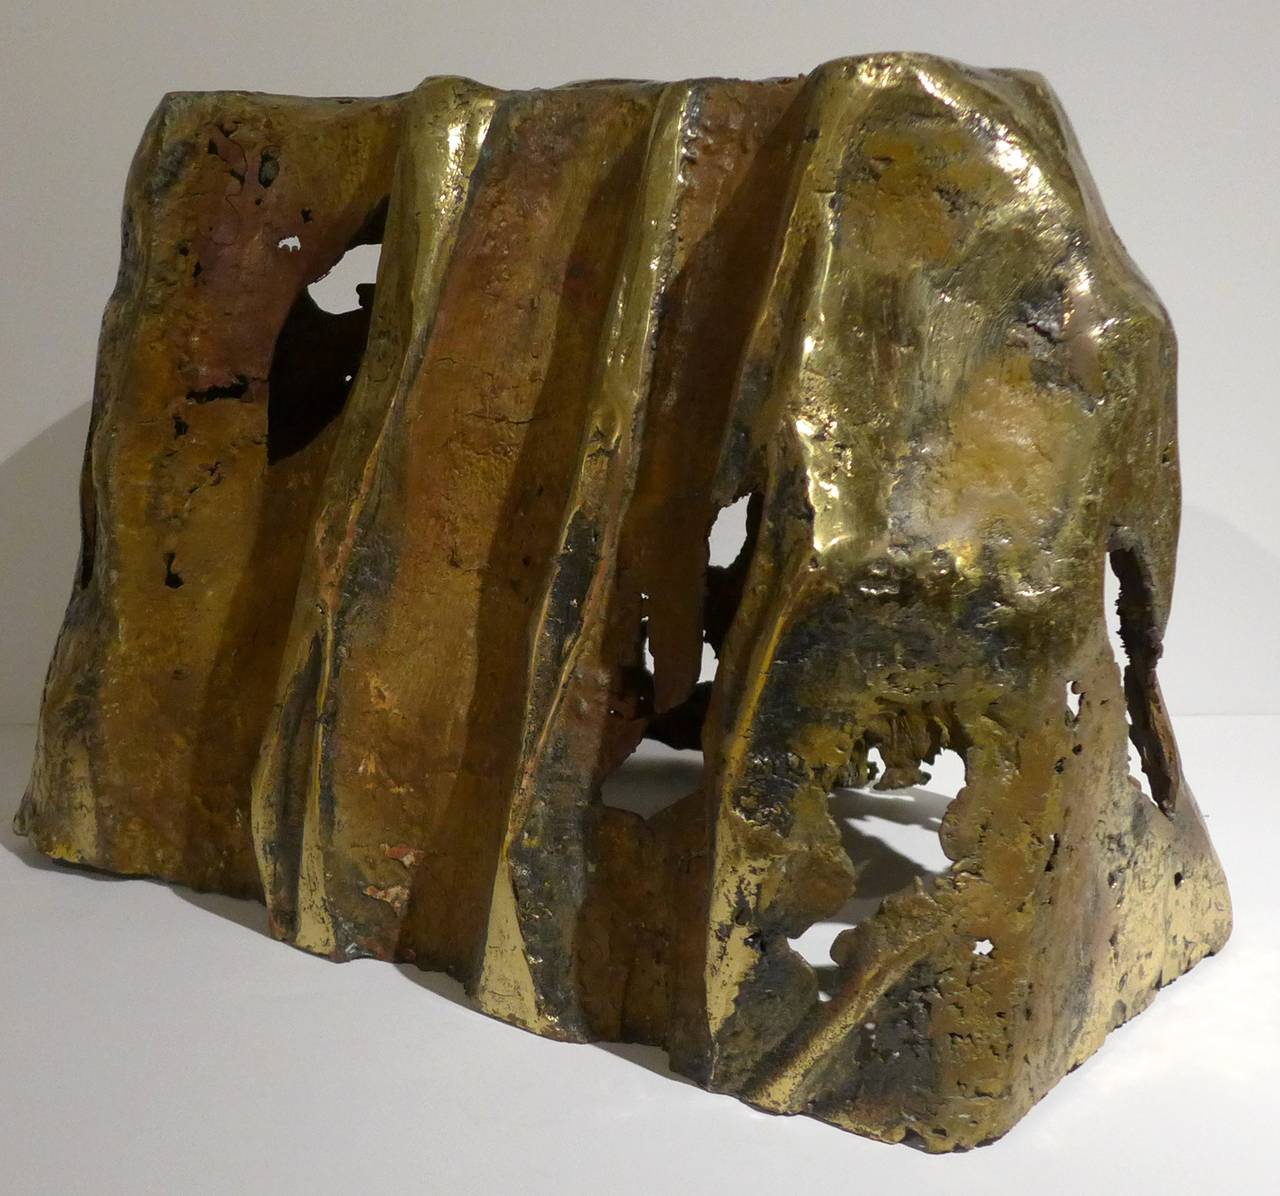 Brutalist sculpture of cast, welded, torch-cut and textured bronze, executed circa 1960s. Interesting and variegated surface. In the manner of Philip and Kelvin LaVerne or Silas Seandel. Can be used as a side table by adding a glass top.